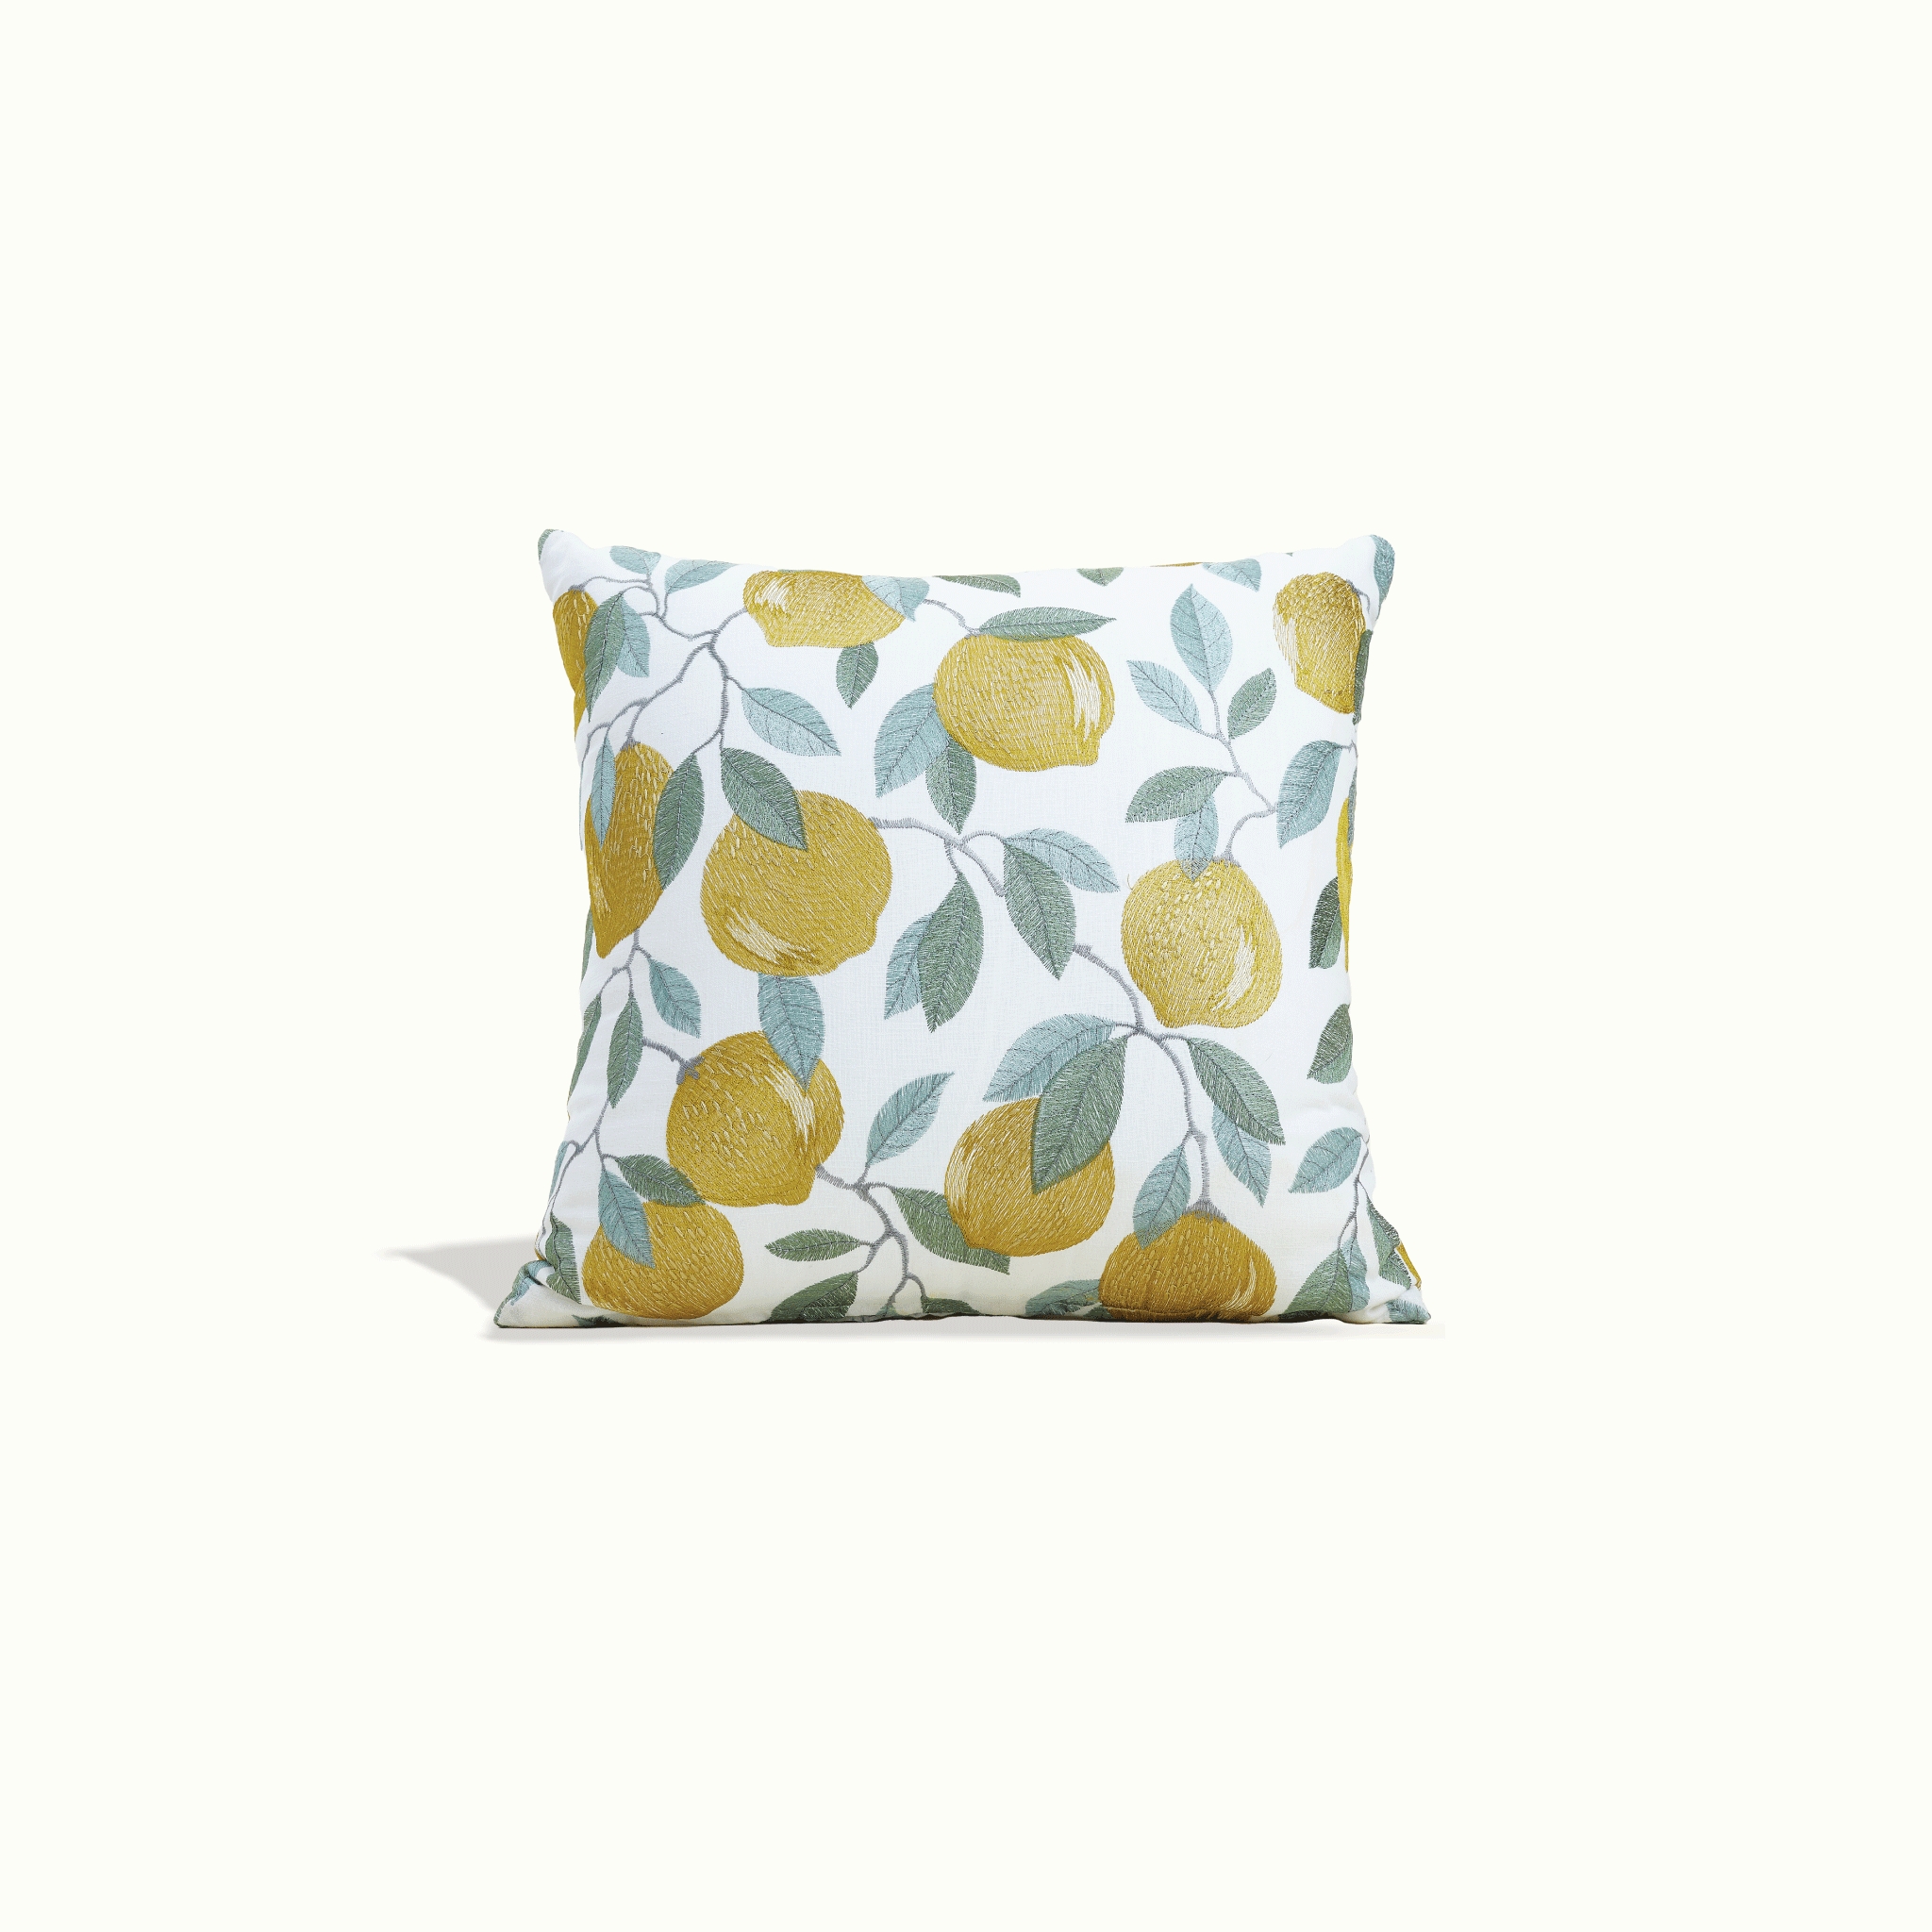 Embroidered Lemon Pillow for Farmhouse by Nomada Deco